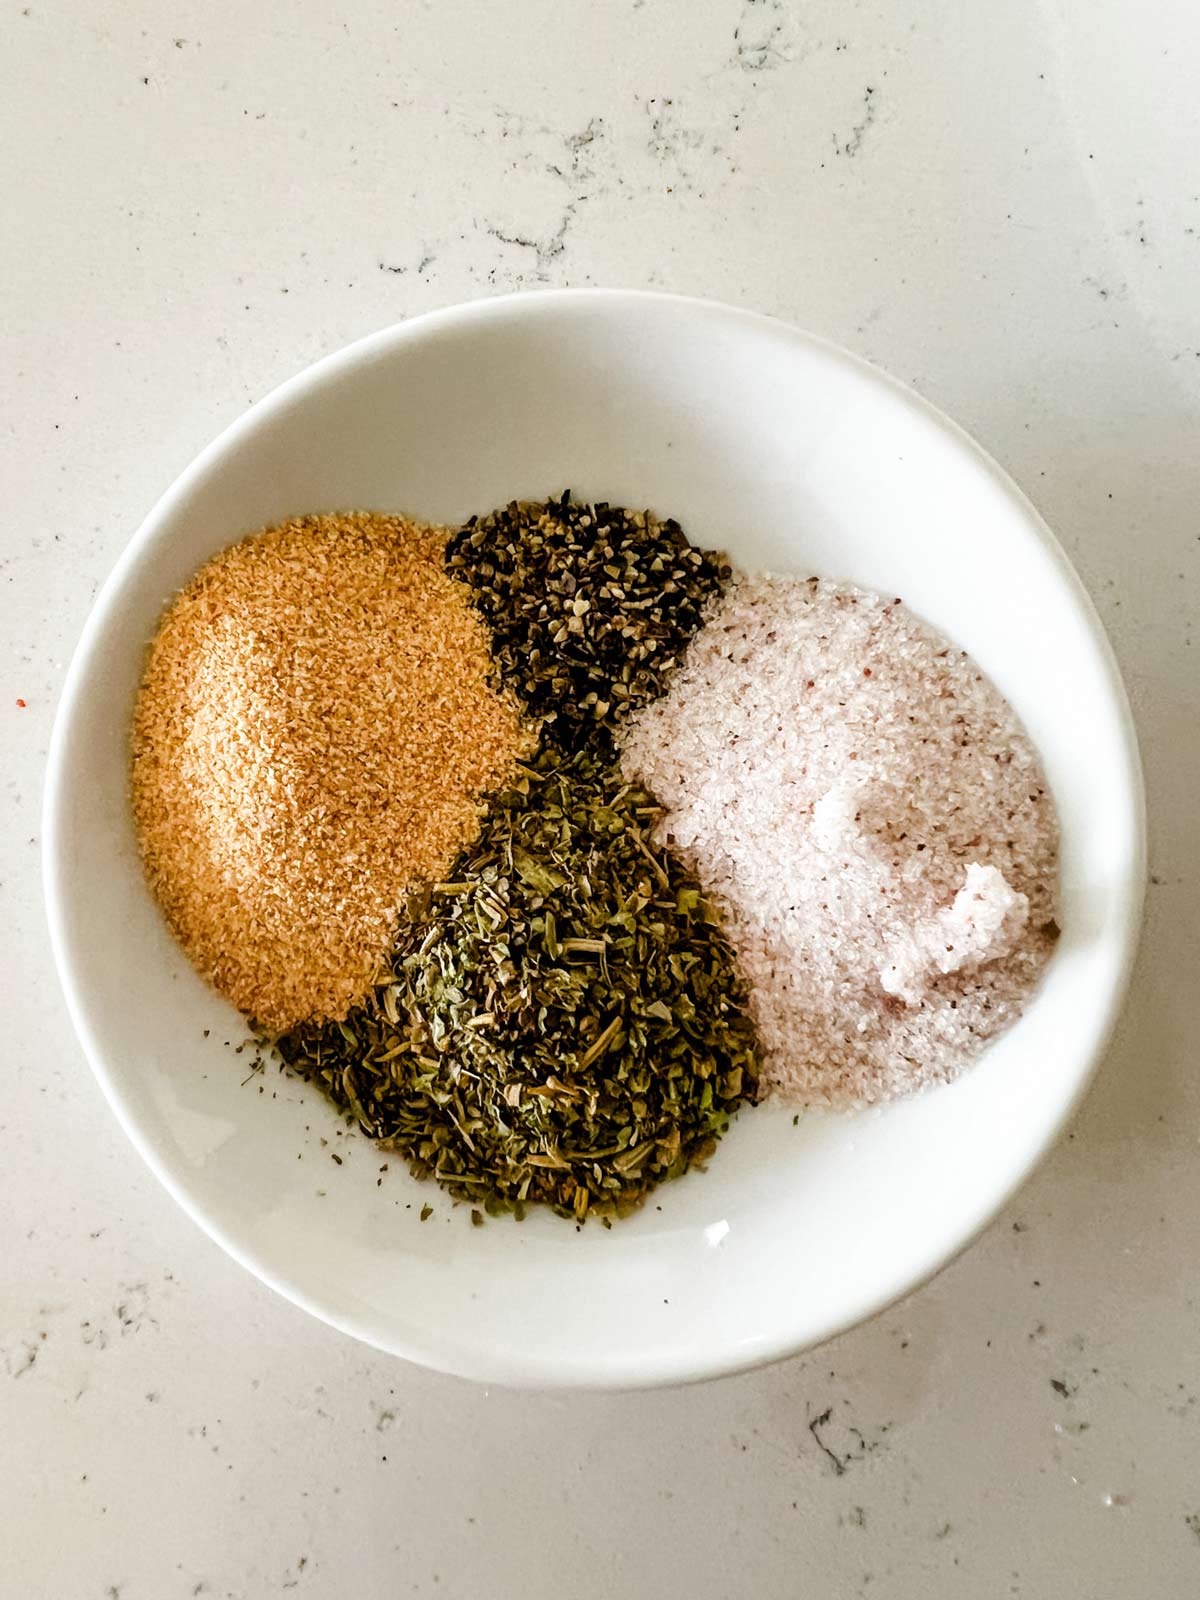 Overhead photo of seasoning mixtures in a small white bowl.